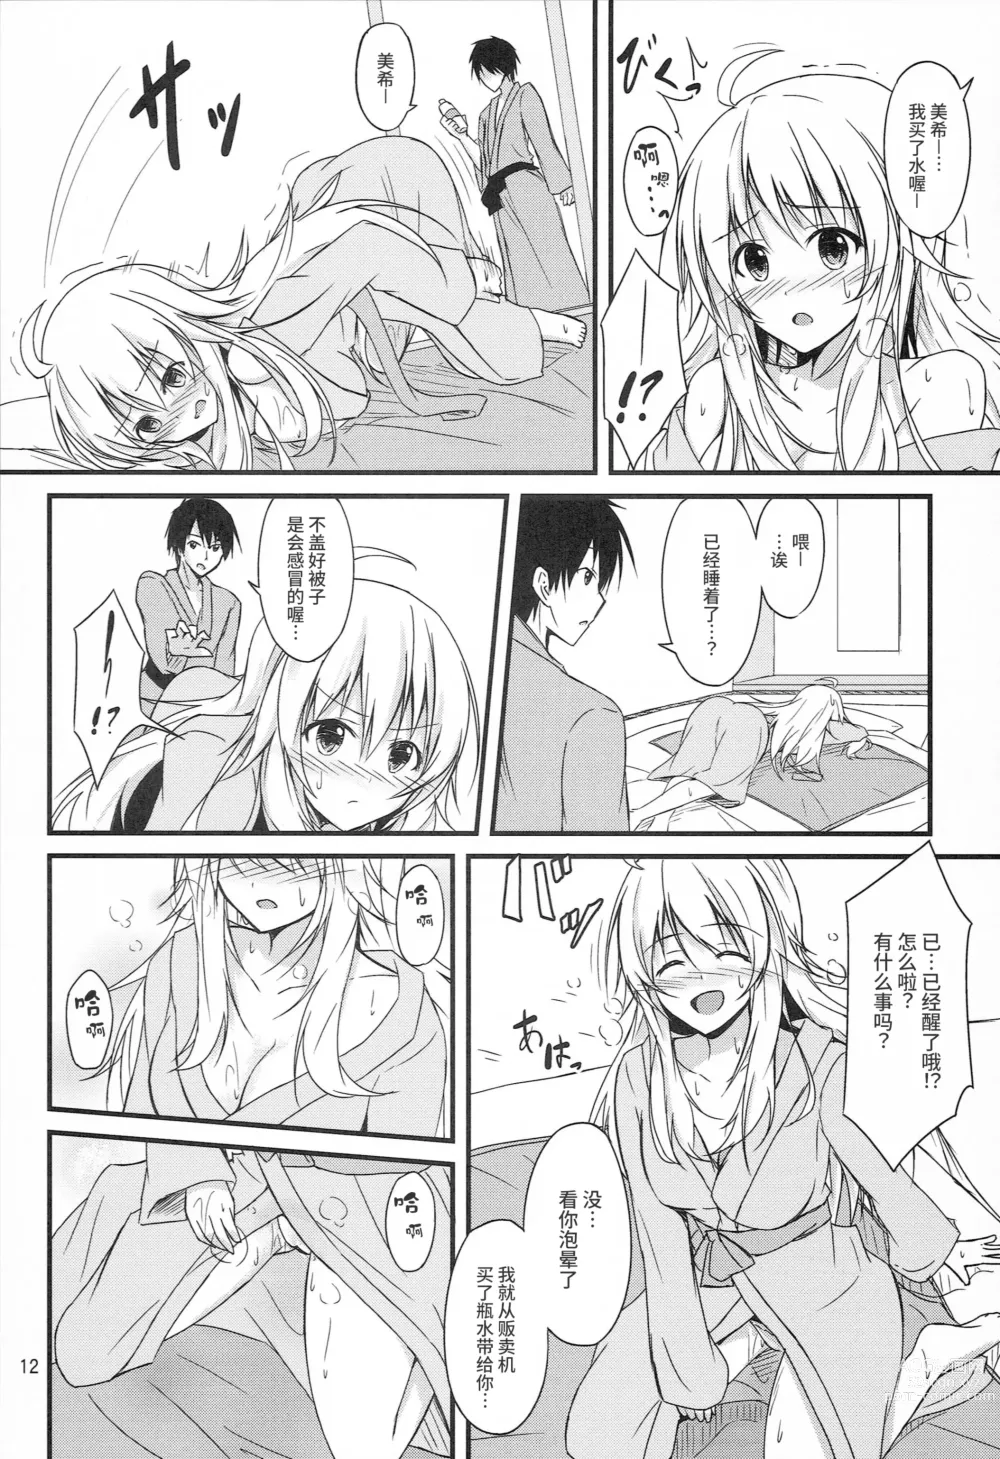 Page 10 of doujinshi Miki to Honey no DeepLove